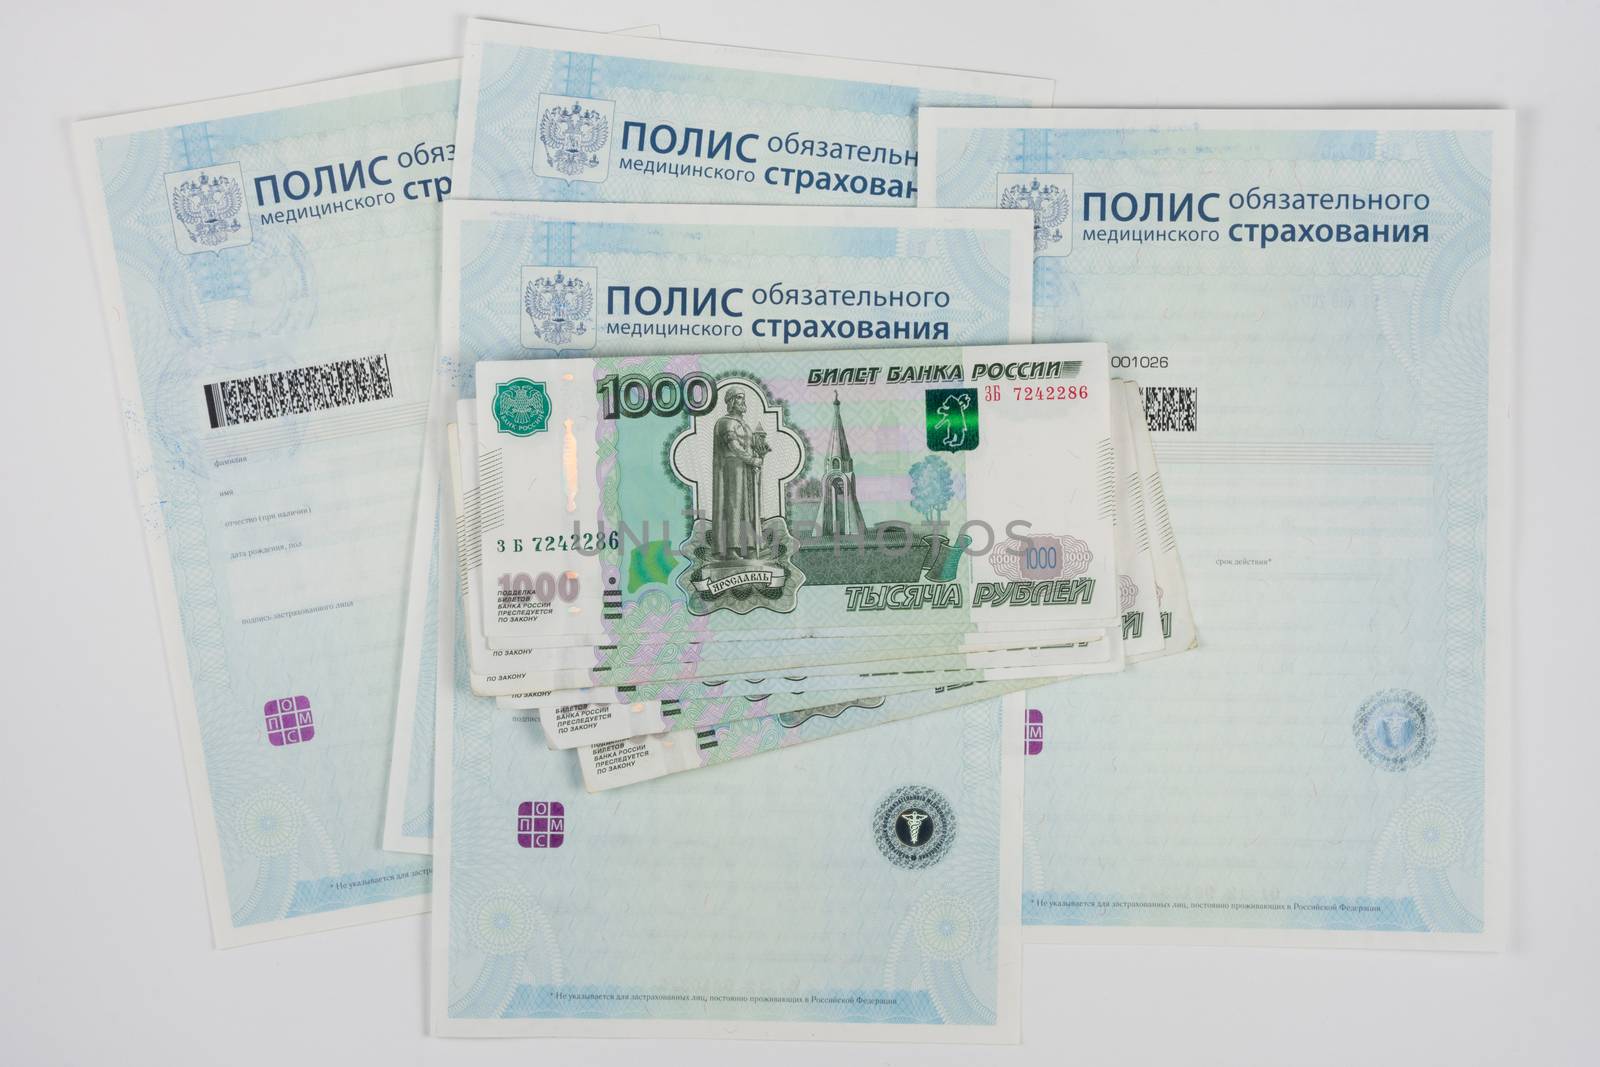 Russian money is on the policy of compulsory medical insurance, white background by Madhourse